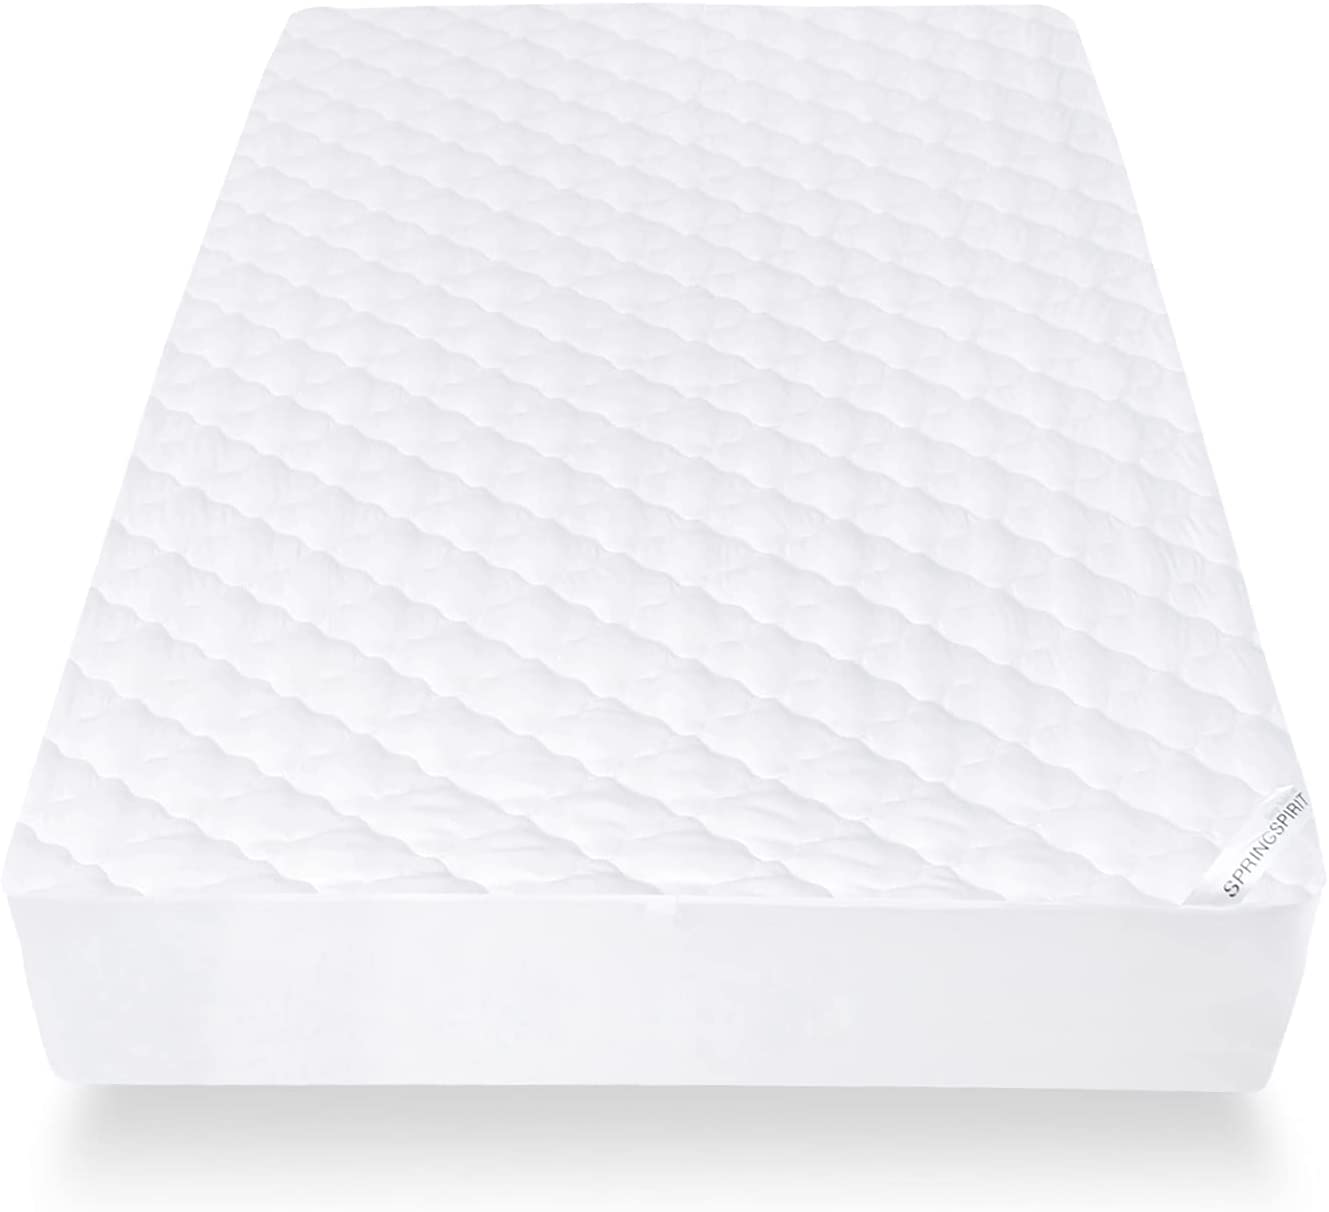 SPRINGSPIRIT Mattress Protector Waterproof Twin Size, Breathable & Noiseless Twin Mattress Pad Cover Quilted Fitted with Deep Pocket up to 14" Depth